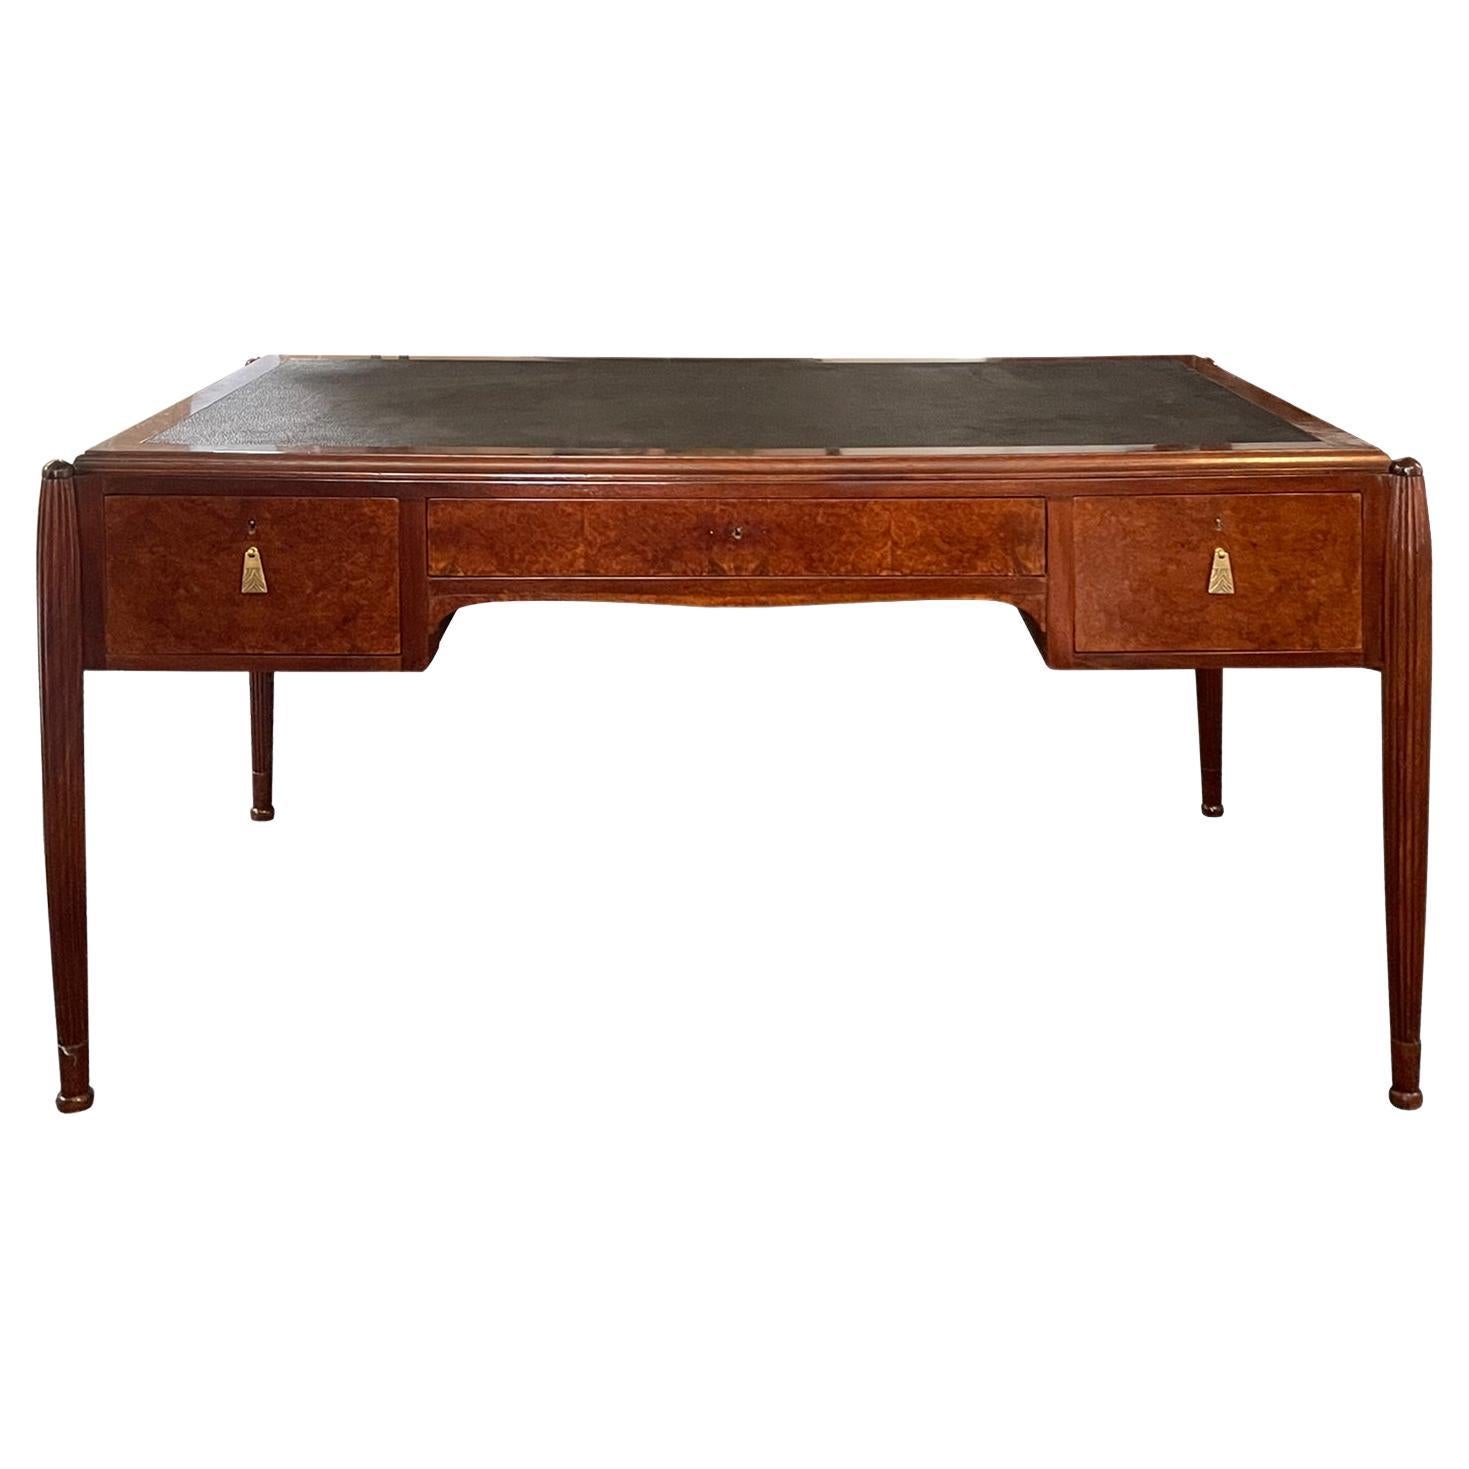 French Art Deco Amboyna Burl Wood Desk with Leather Top For Sale